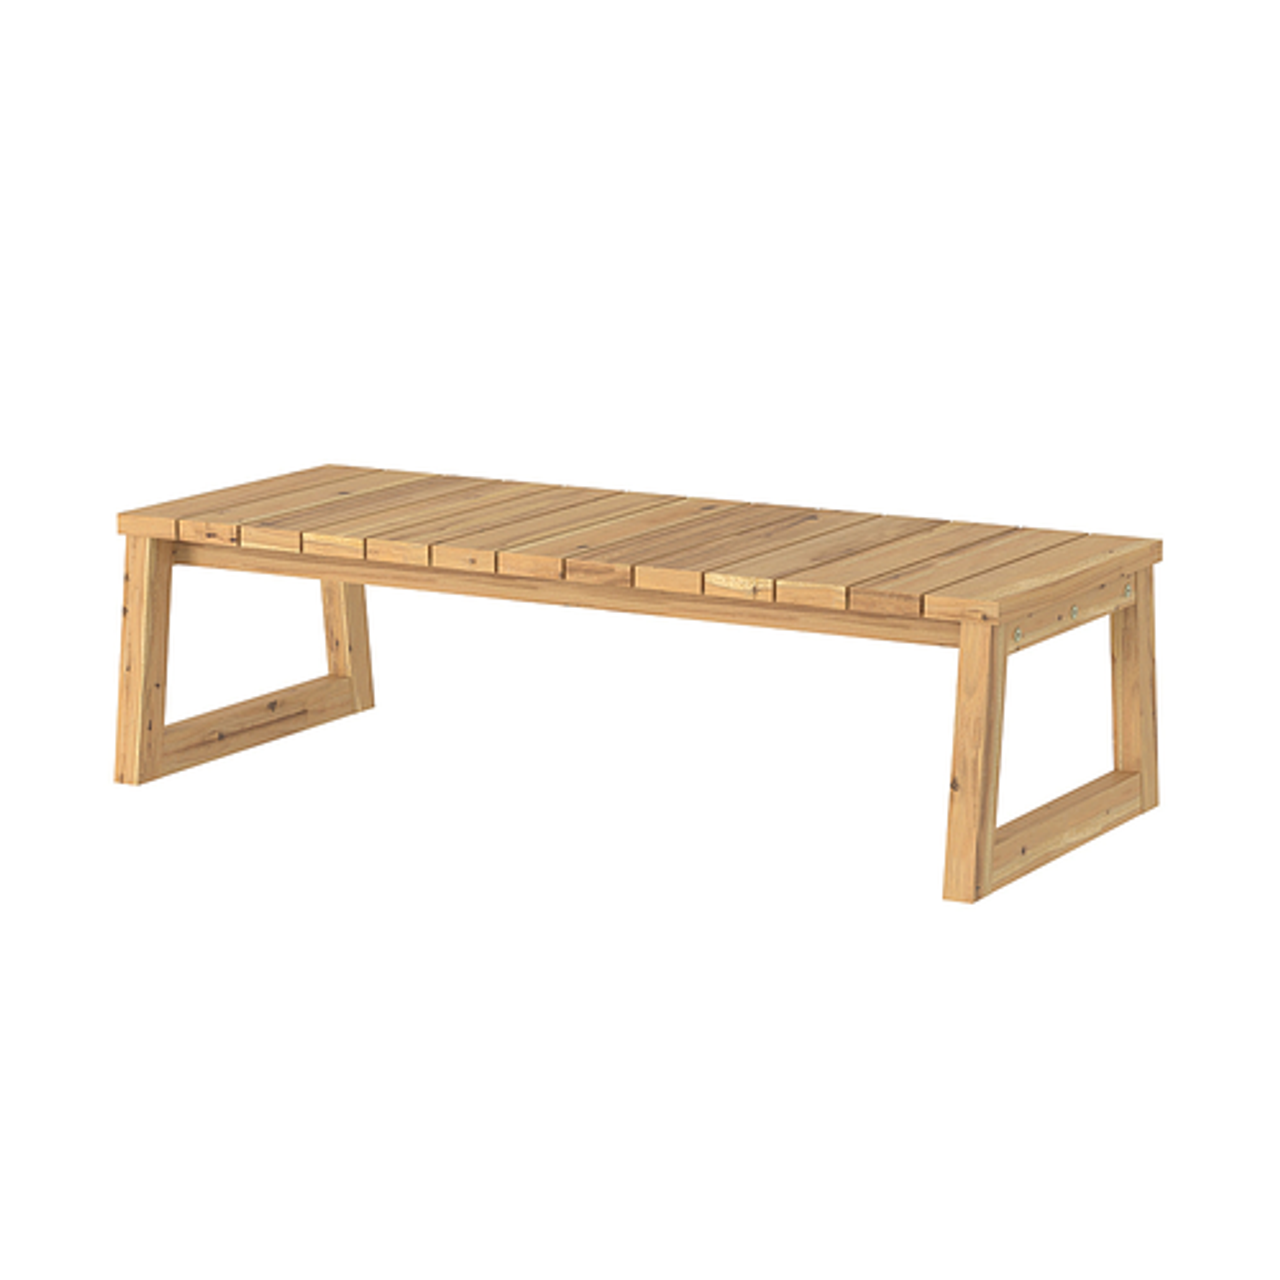 Walker Edison - Modern Solid Wood Outdoor Coffee Table - Natural